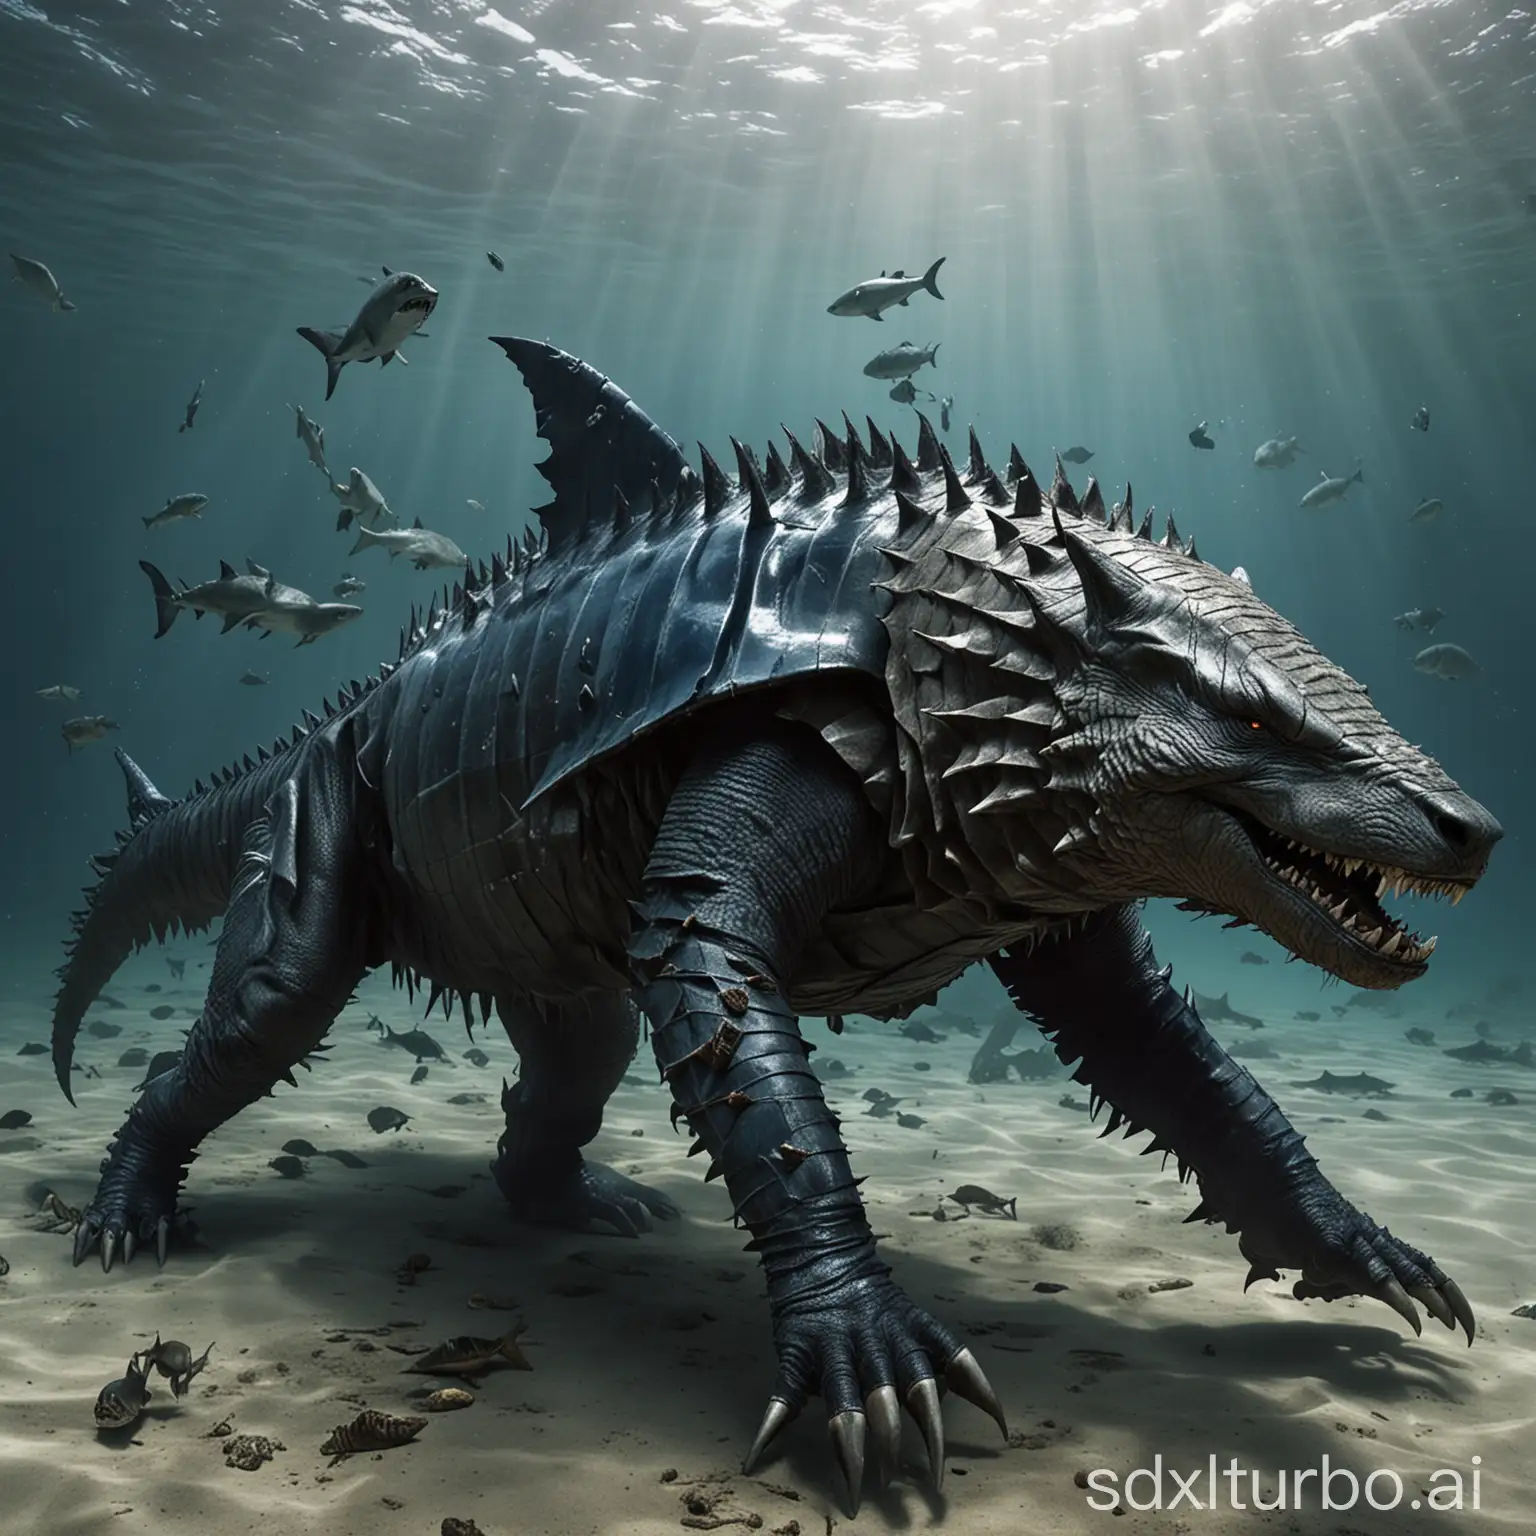 Underwater-Battle-Armored-Wolf-with-Sharklike-Features